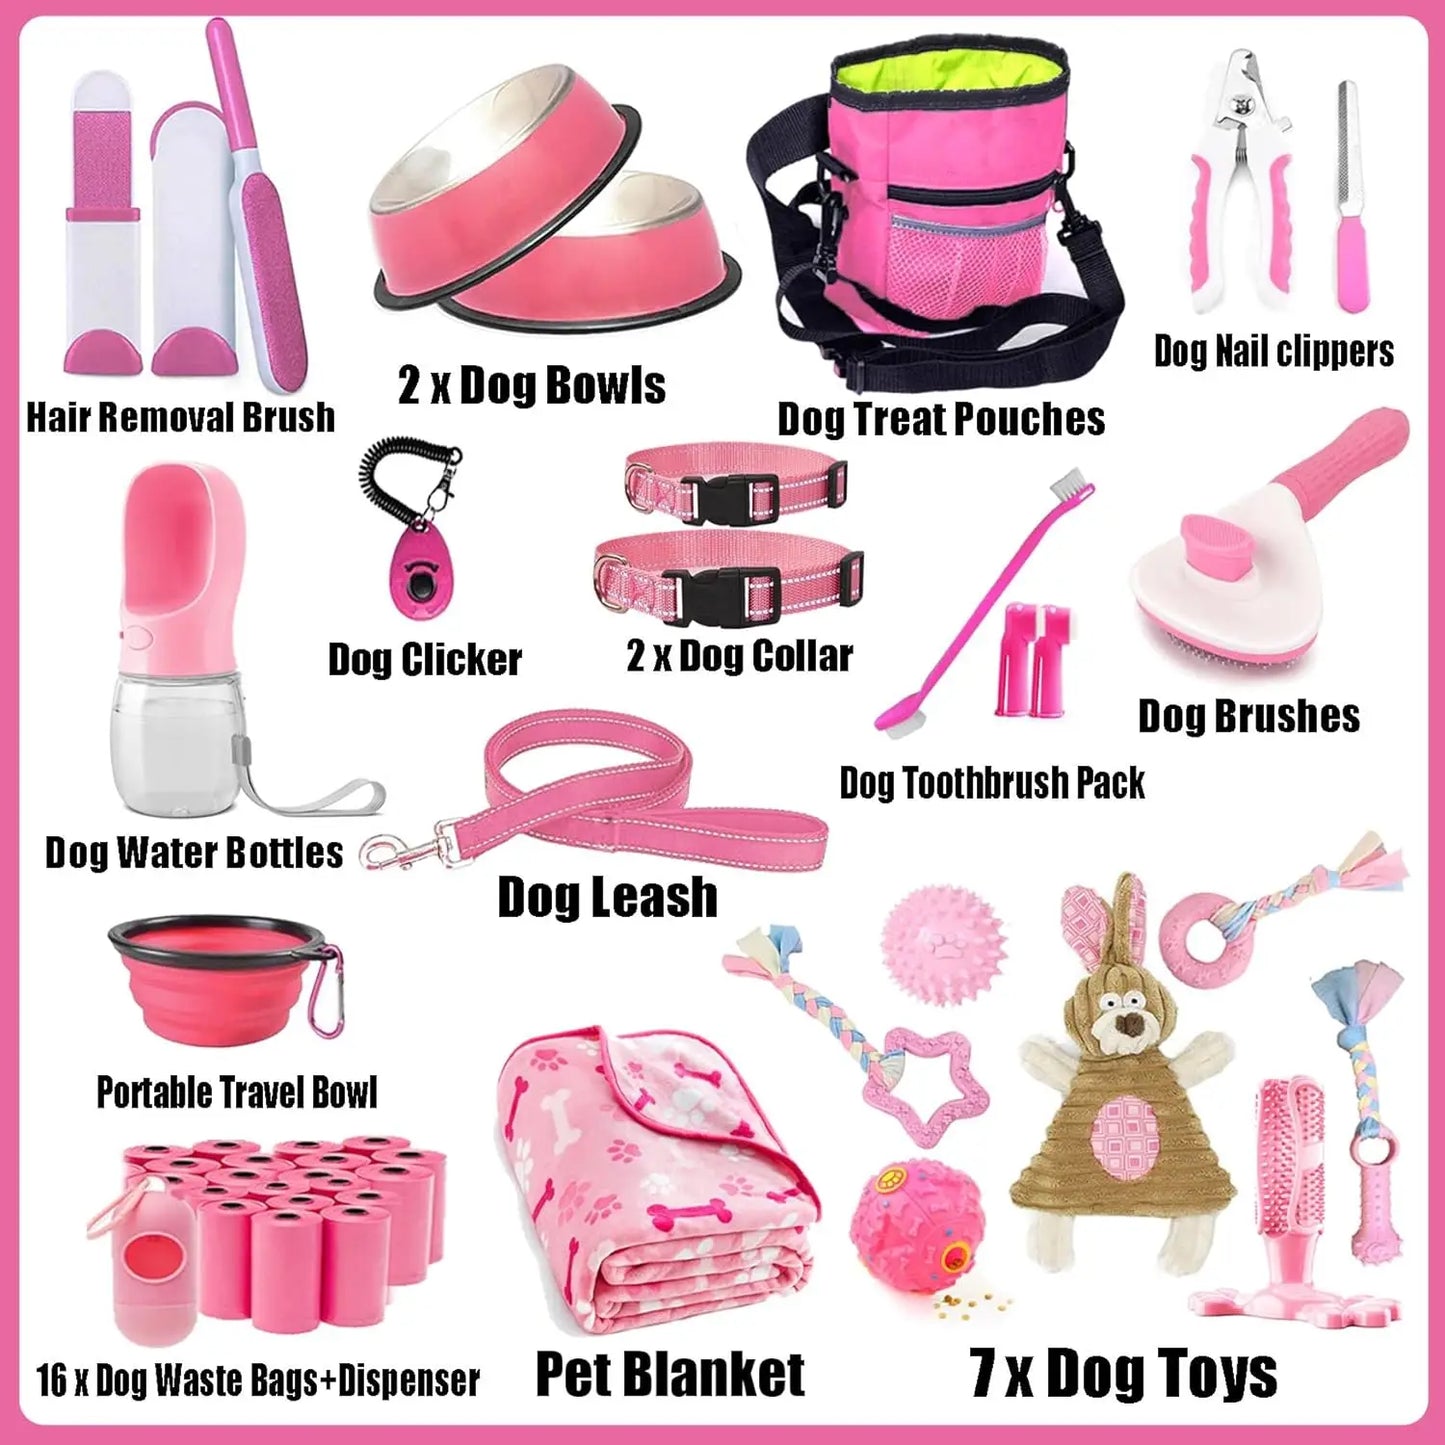 Puppy Supplies Starter Kit - 39 Pieces Set of Puppy Essentials,Includes Dog Leash,Toys, Bowl,Brushes,Water Bottles,and More